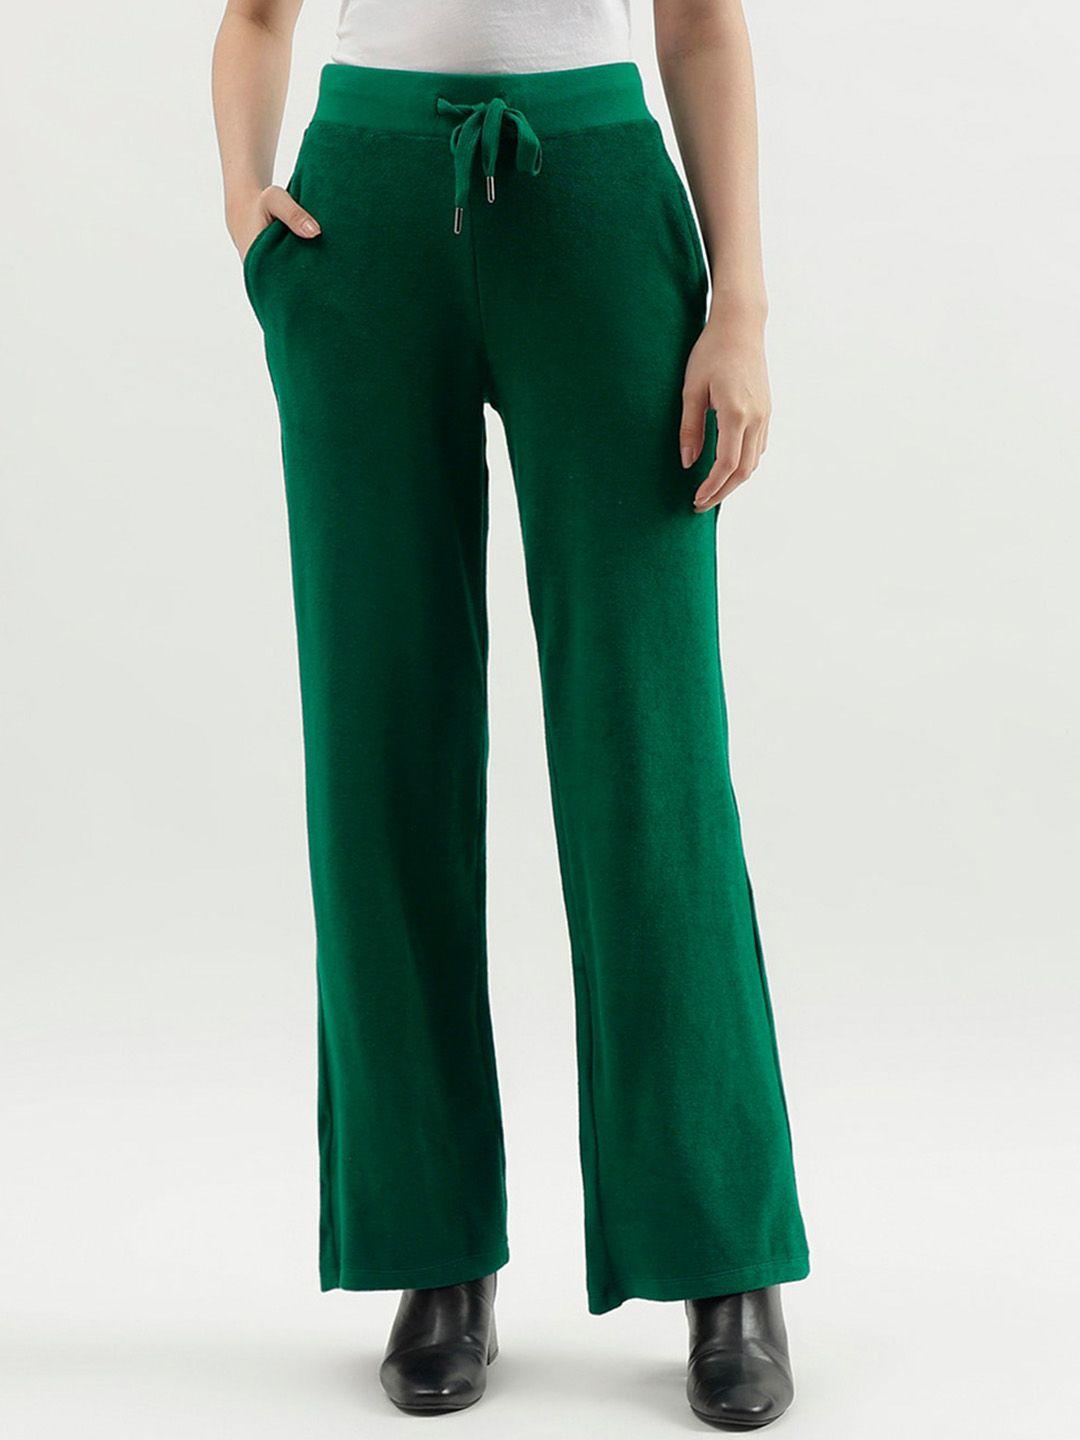 united colors of benetton women mid rise flared cotton parallel trousers